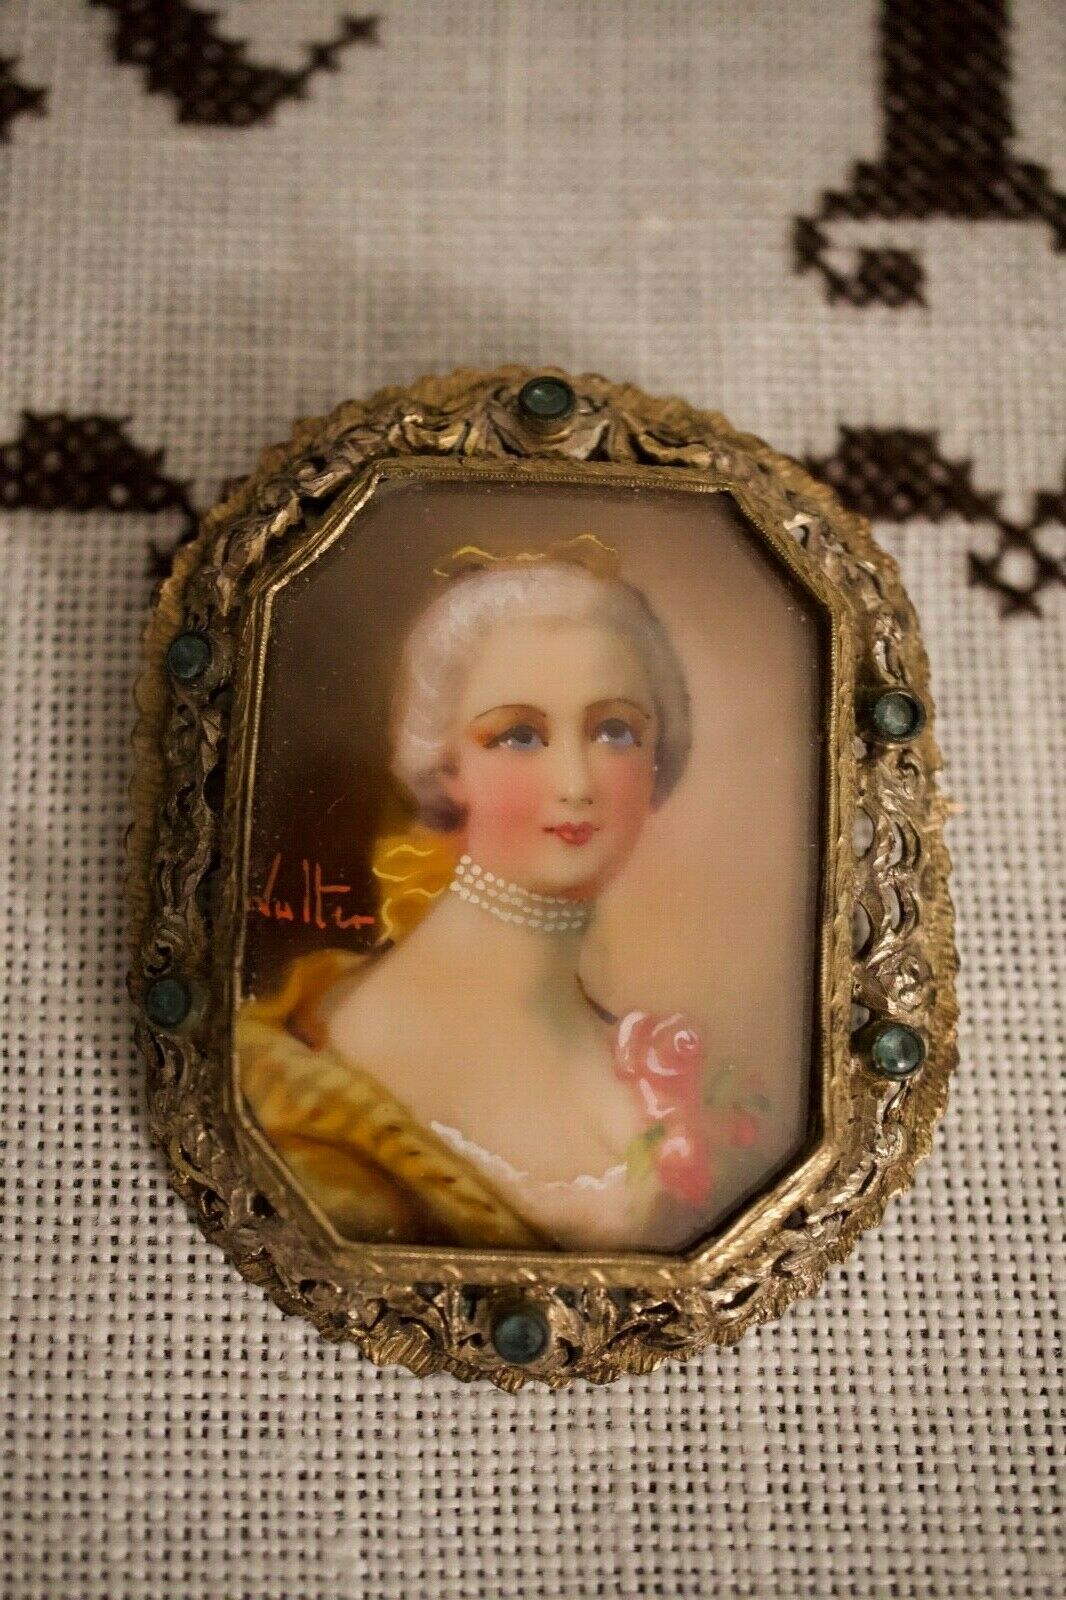 Edward Victorian Ornate Filigree Hand Painted Victorian Lady Signed Cameo Brooch